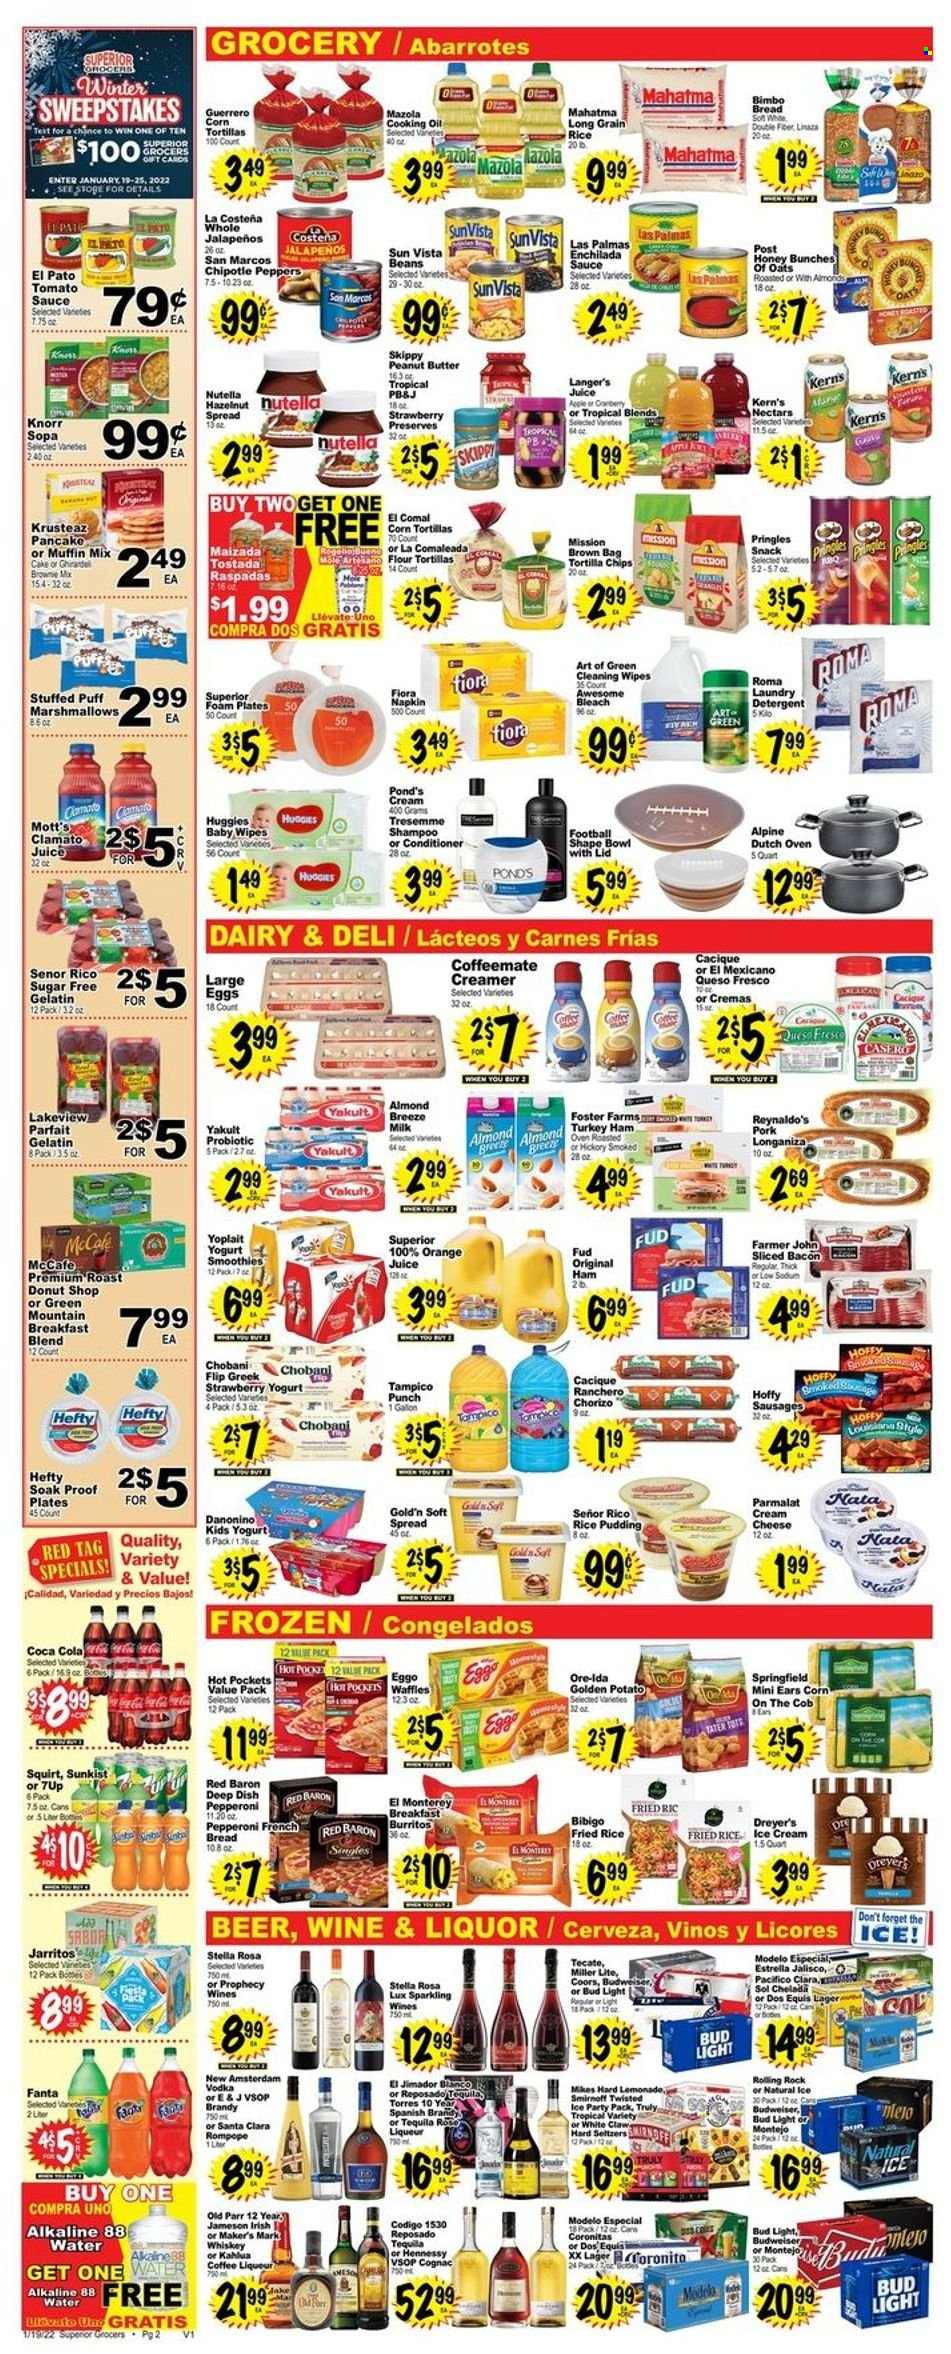 thumbnail - Superior Grocers Flyer - 01/19/2022 - 01/25/2022 - Sales products - bread, corn tortillas, cake, flour tortillas, french bread, waffles, muffin mix, peppers, Mott's, hot pocket, Knorr, sauce, burrito, bacon, ham, chorizo, sausage, pepperoni, queso fresco, cheese, yoghurt, Parmalat, Yoplait, Chobani, rice pudding, milk, Almond Breeze, large eggs, creamer, Ore-Ida, Red Baron, marshmallows, Nutella, snack, tortilla chips, Pringles, enchilada sauce, tomato sauce, long grain rice, oil, peanut butter, Coca-Cola, lemonade, orange juice, juice, Fanta, Clamato, 7UP, Kern's, fruit punch, smoothie, coffee, Kahlúa, McCafe, breakfast blend, Green Mountain, sparkling wine, brandy, cognac, liqueur, Smirnoff, tequila, vodka, whiskey, Jameson, liquor, White Claw, TRULY, whisky, beer, Bud Light, Sol, Lager, Modelo, bleach, laundry detergent, POND'S, conditioner, TRESemmé, plate, bowl, cast iron dutch oven, Hefty, bag, foam plates, Budweiser, Miller Lite, Coors, Dos Equis. Page 2.